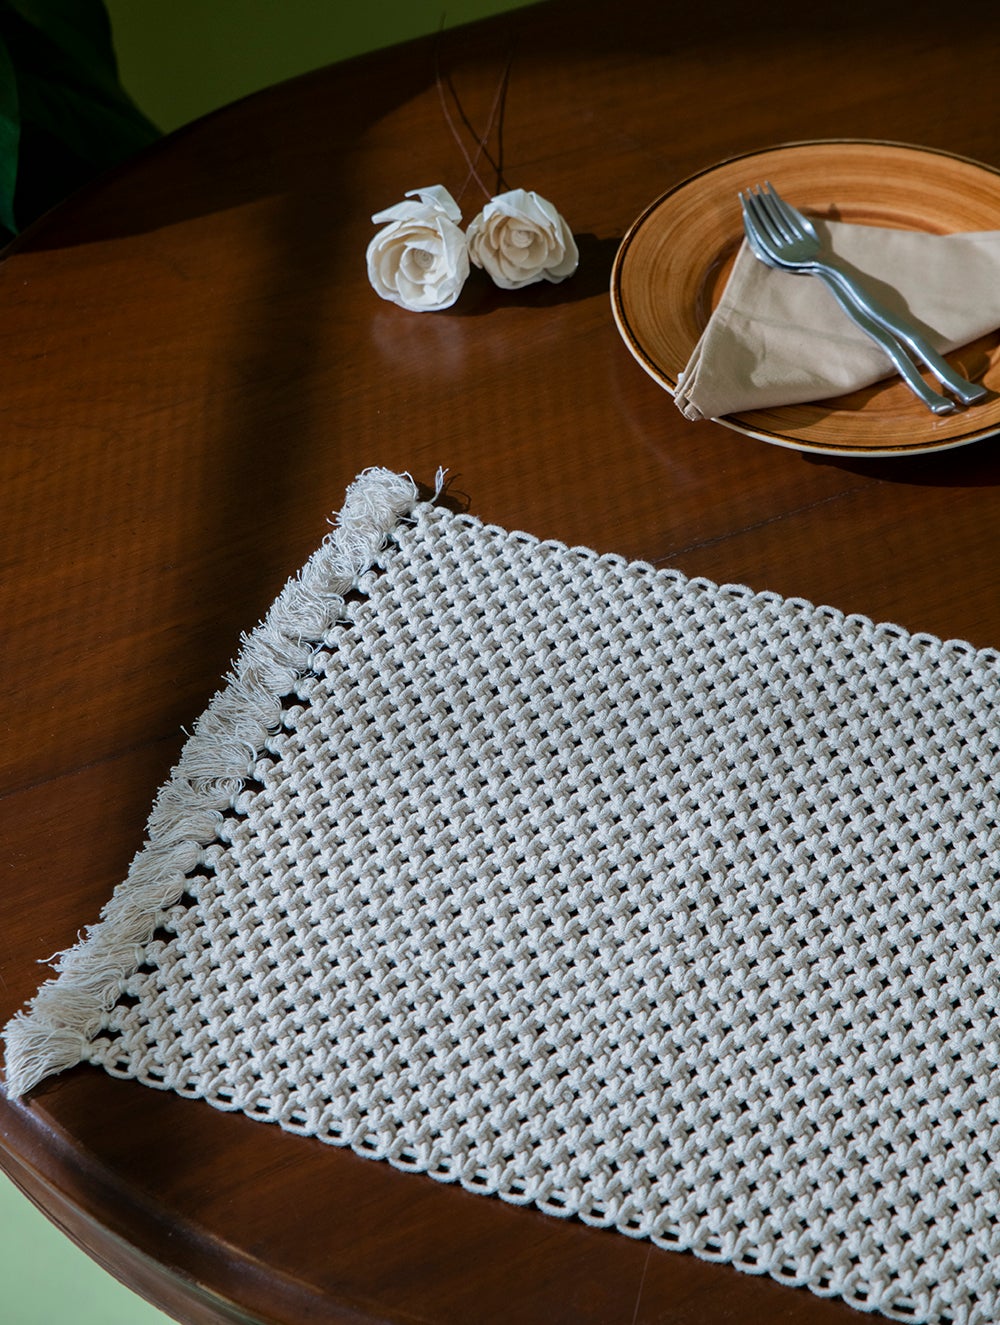 Load image into Gallery viewer, Classic Handknotted Macramé Table Mats - Cream (Set of 4)